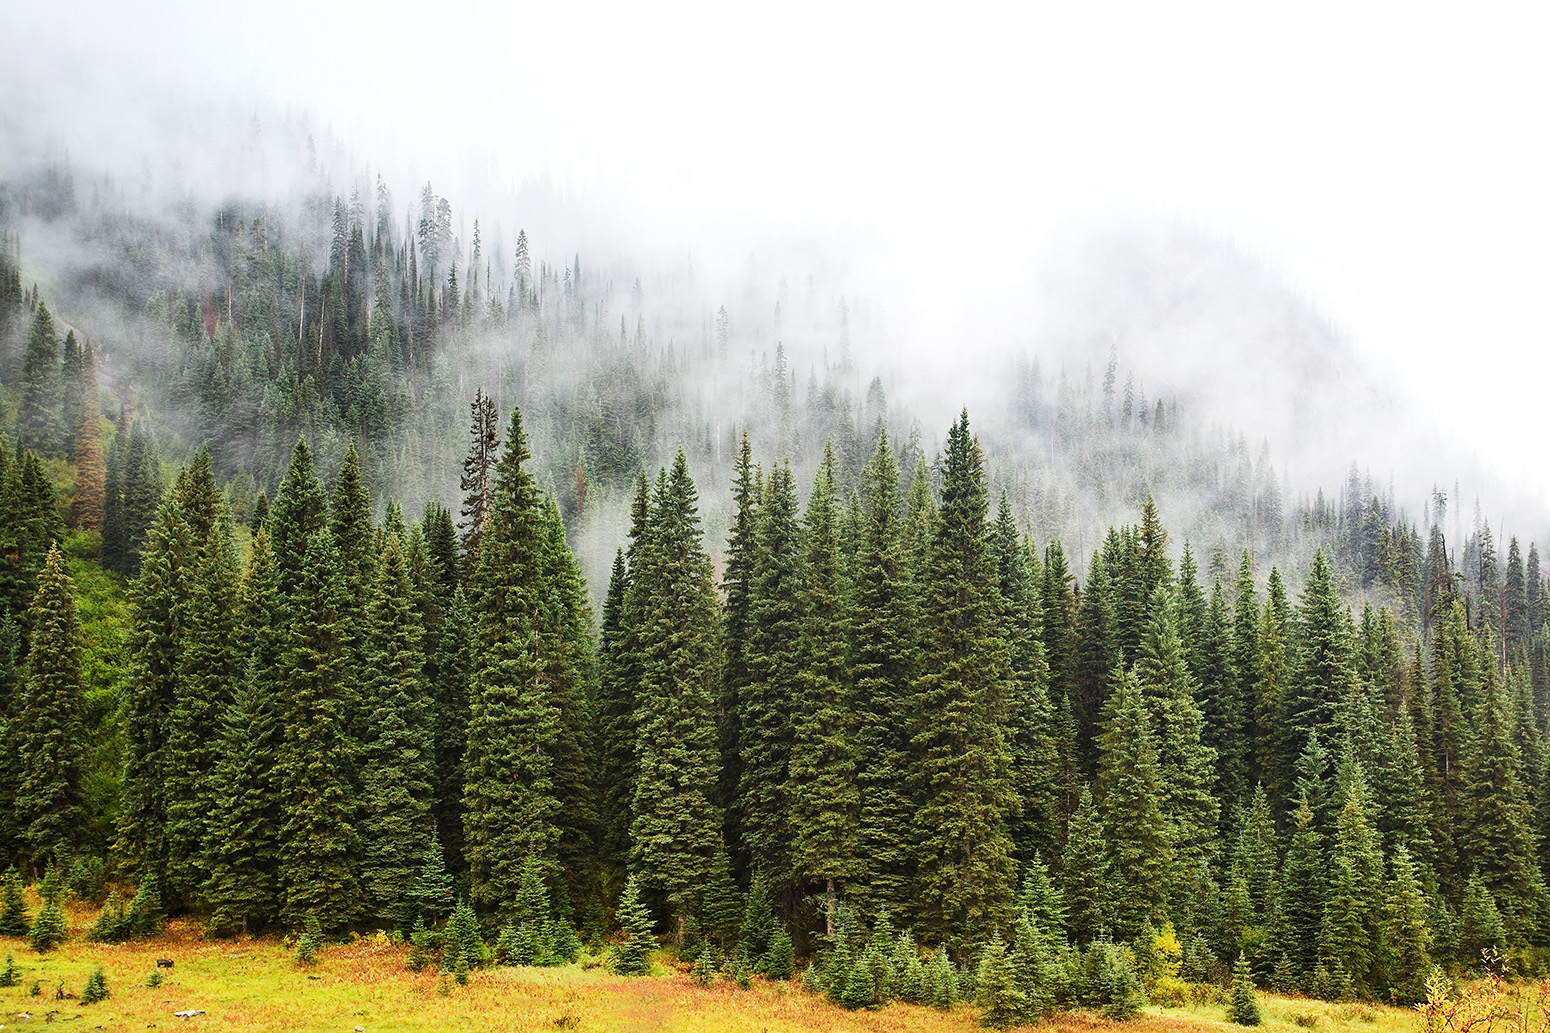 Foggy evergreen forest in the Canadian Rockies, British Columbia. Credit: Ken Gillespie Photography / Alamy Stock Photo. BY12TX